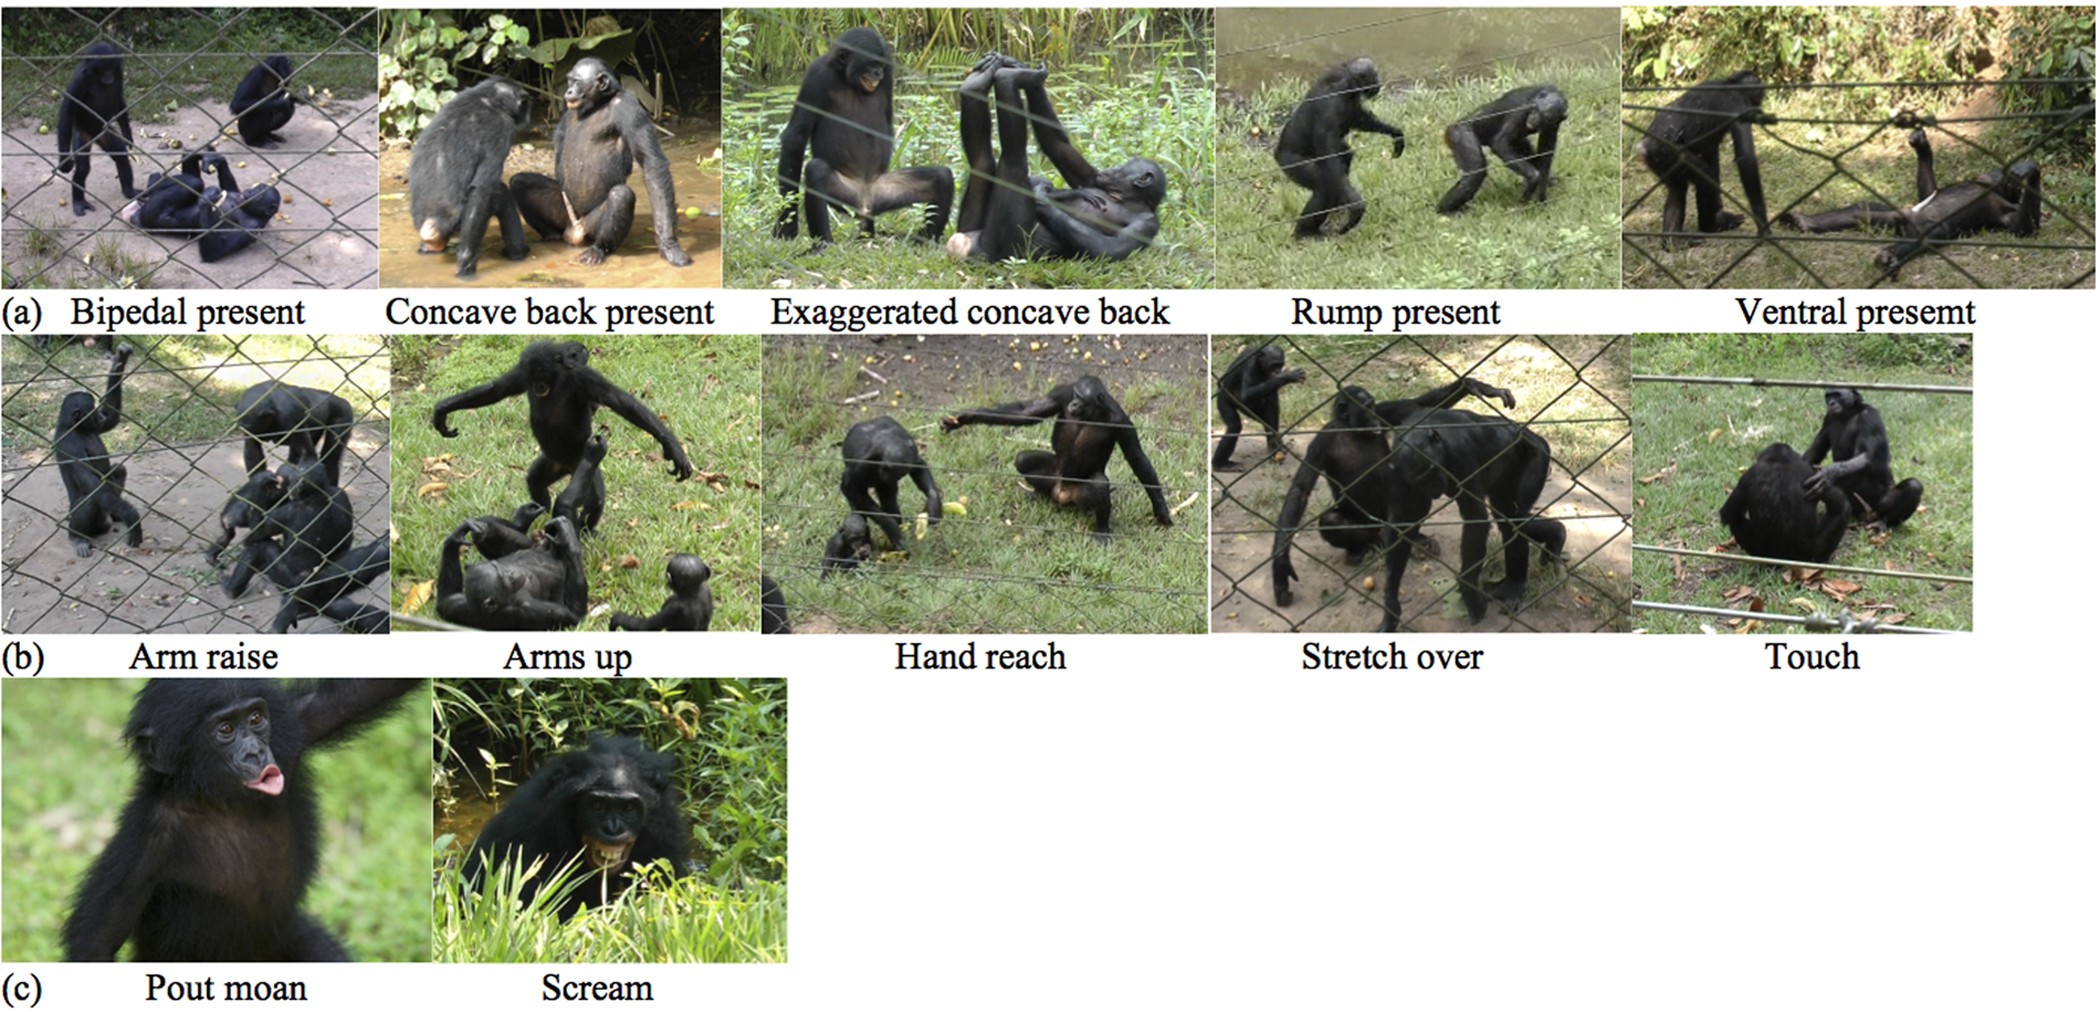 Complex patterns of signalling to convey different social goals of sex in  bonobos, Pan paniscus | Scientific Reports